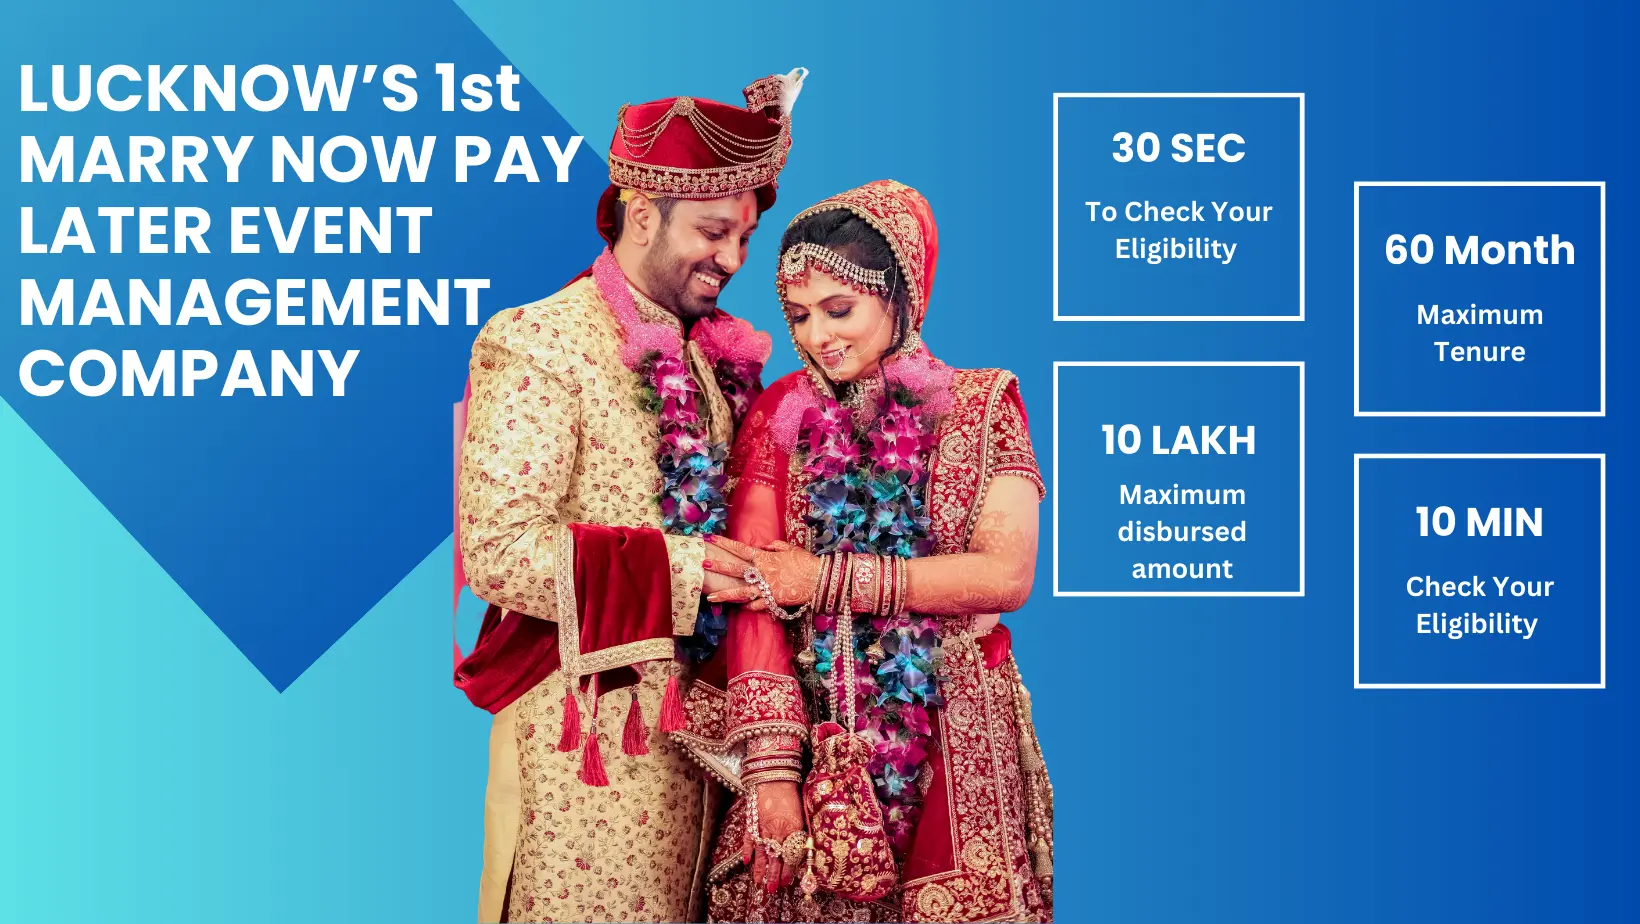 LUCKNOW’S 1st Merry Now PAY LATER